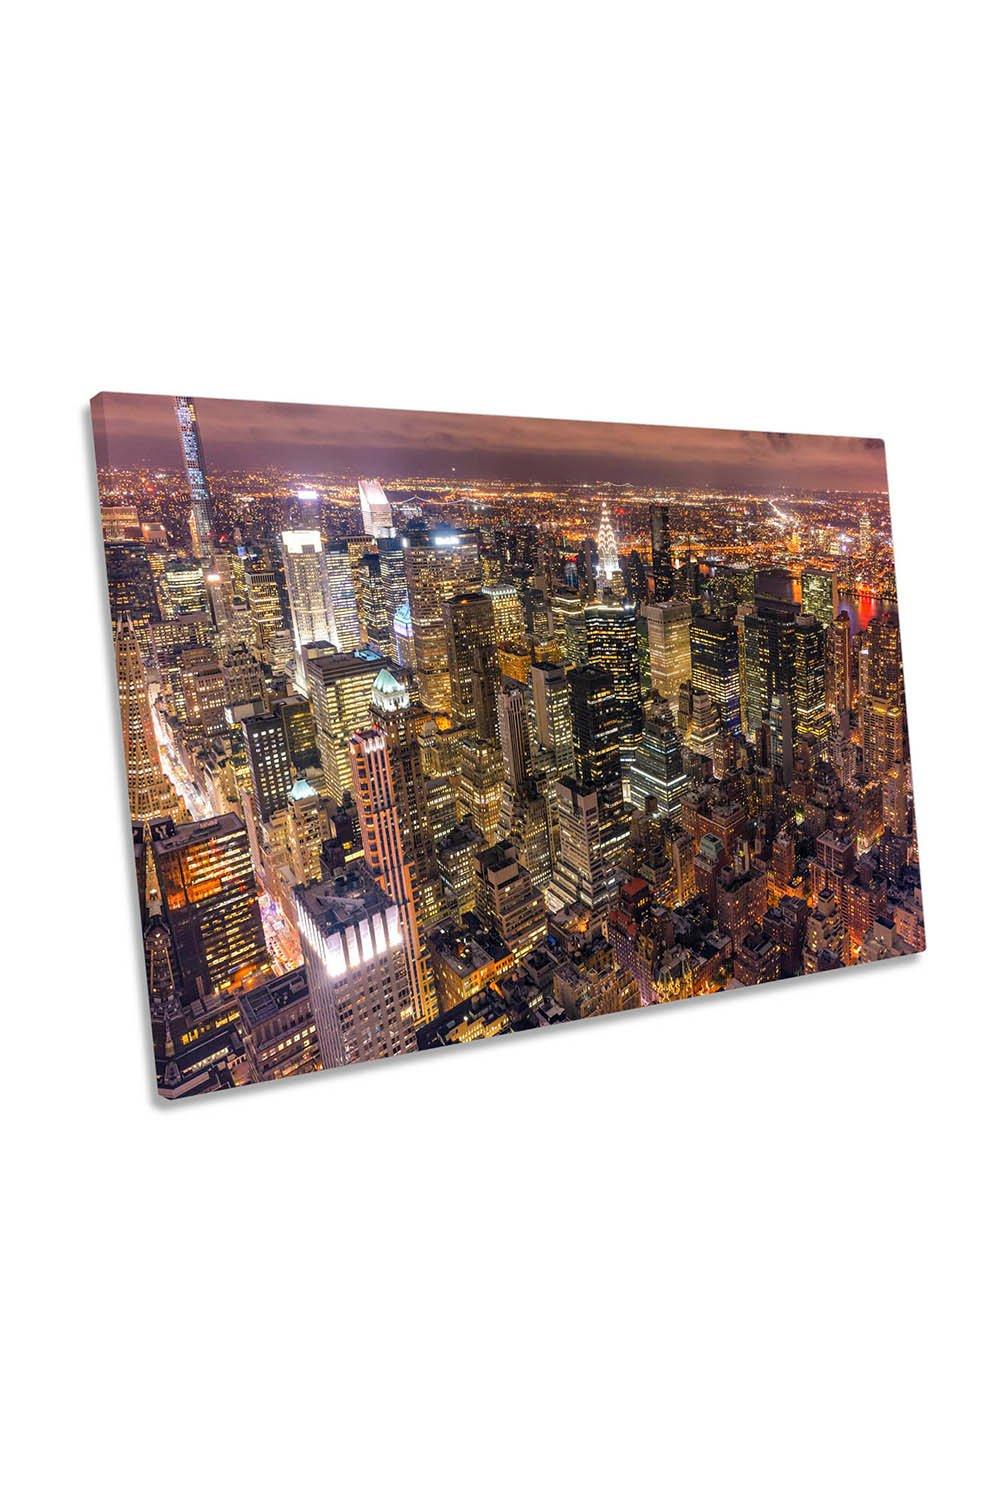 Night Life New York City Canvas Wall Art Picture Print